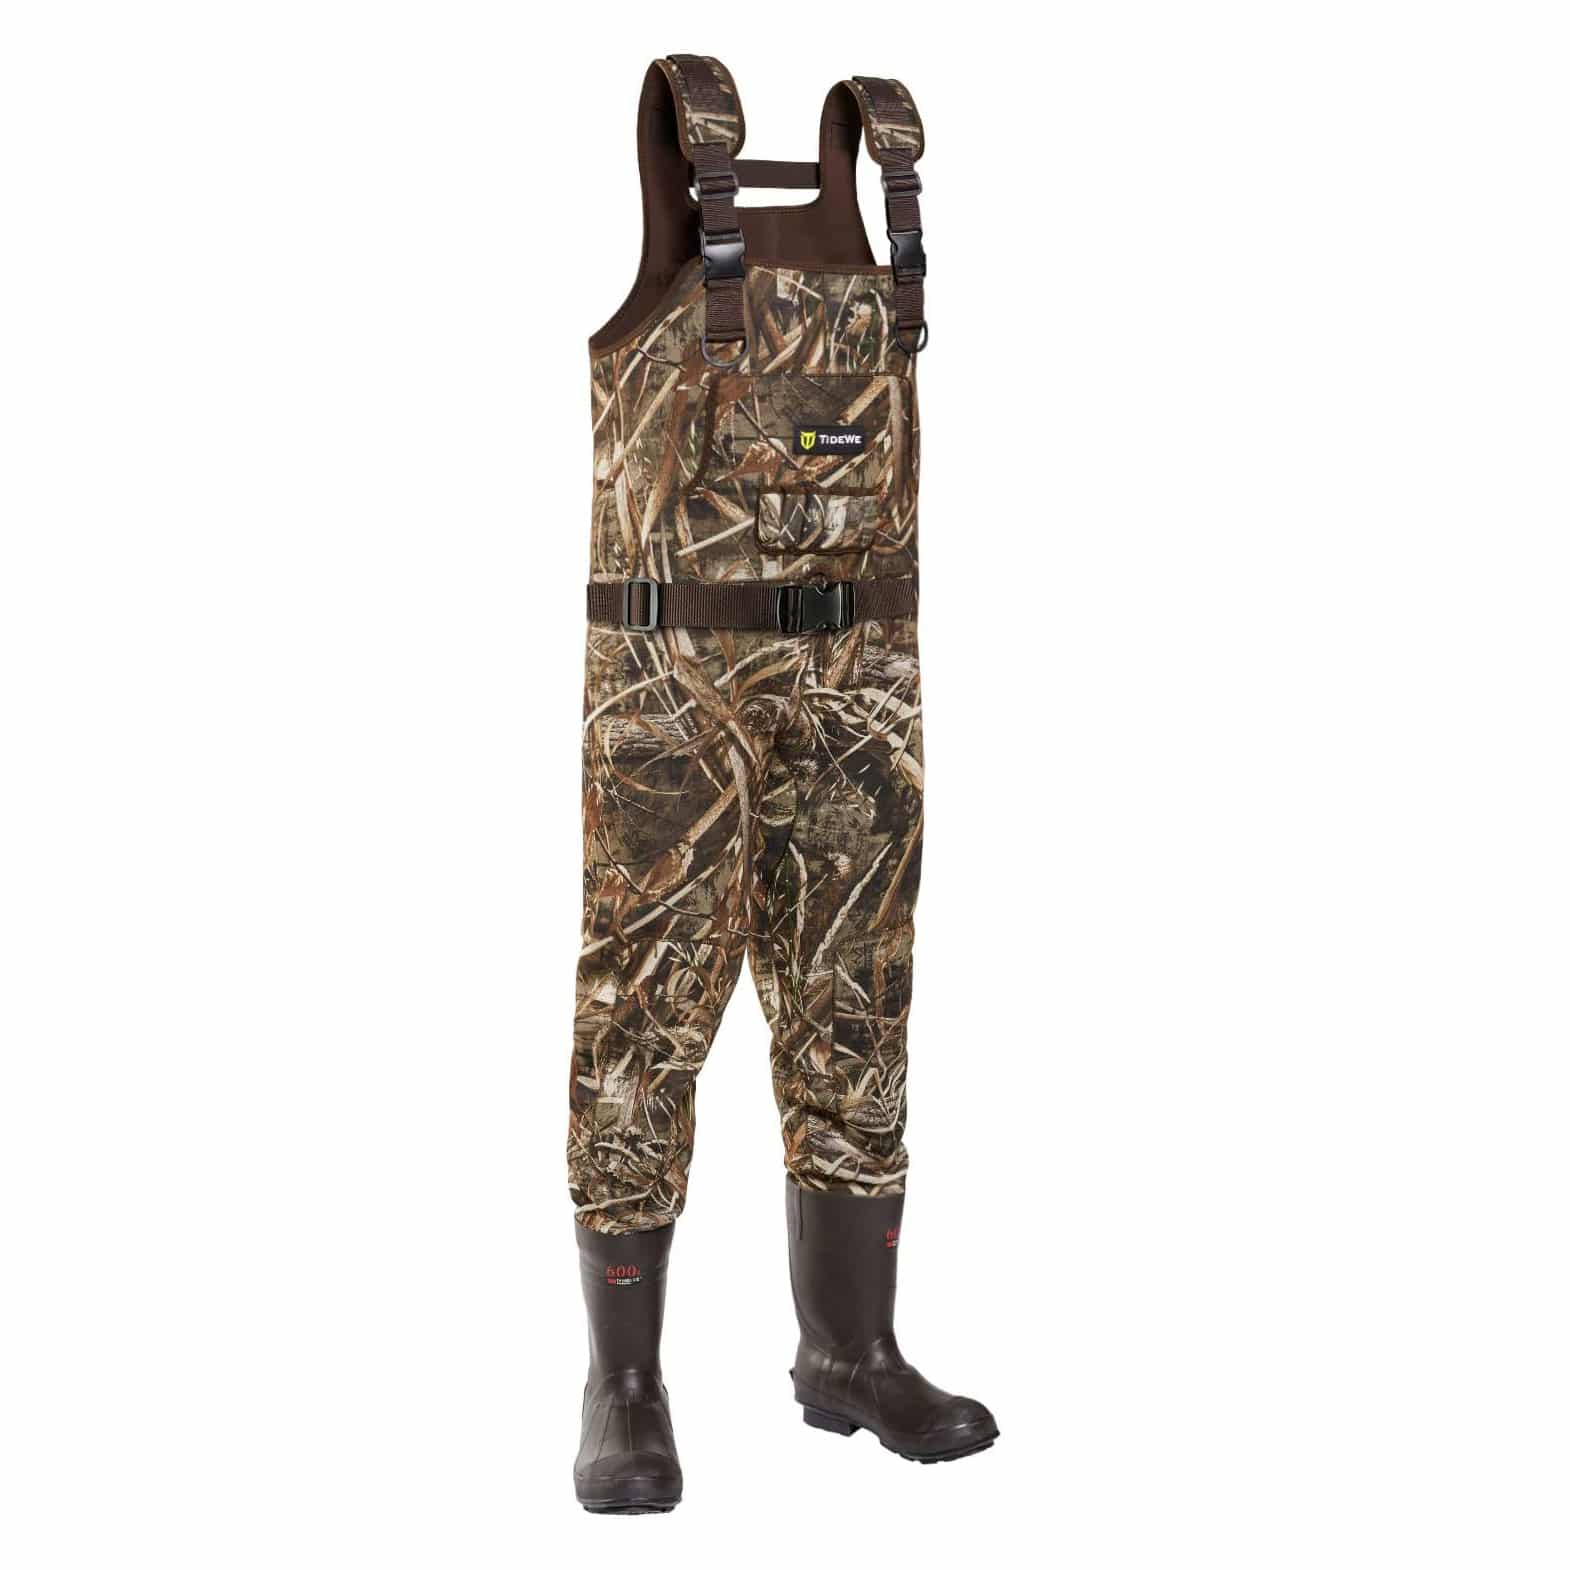 Top 10 Best Fishing & Hunting Waders in 2022 Reviews Show Guide Me